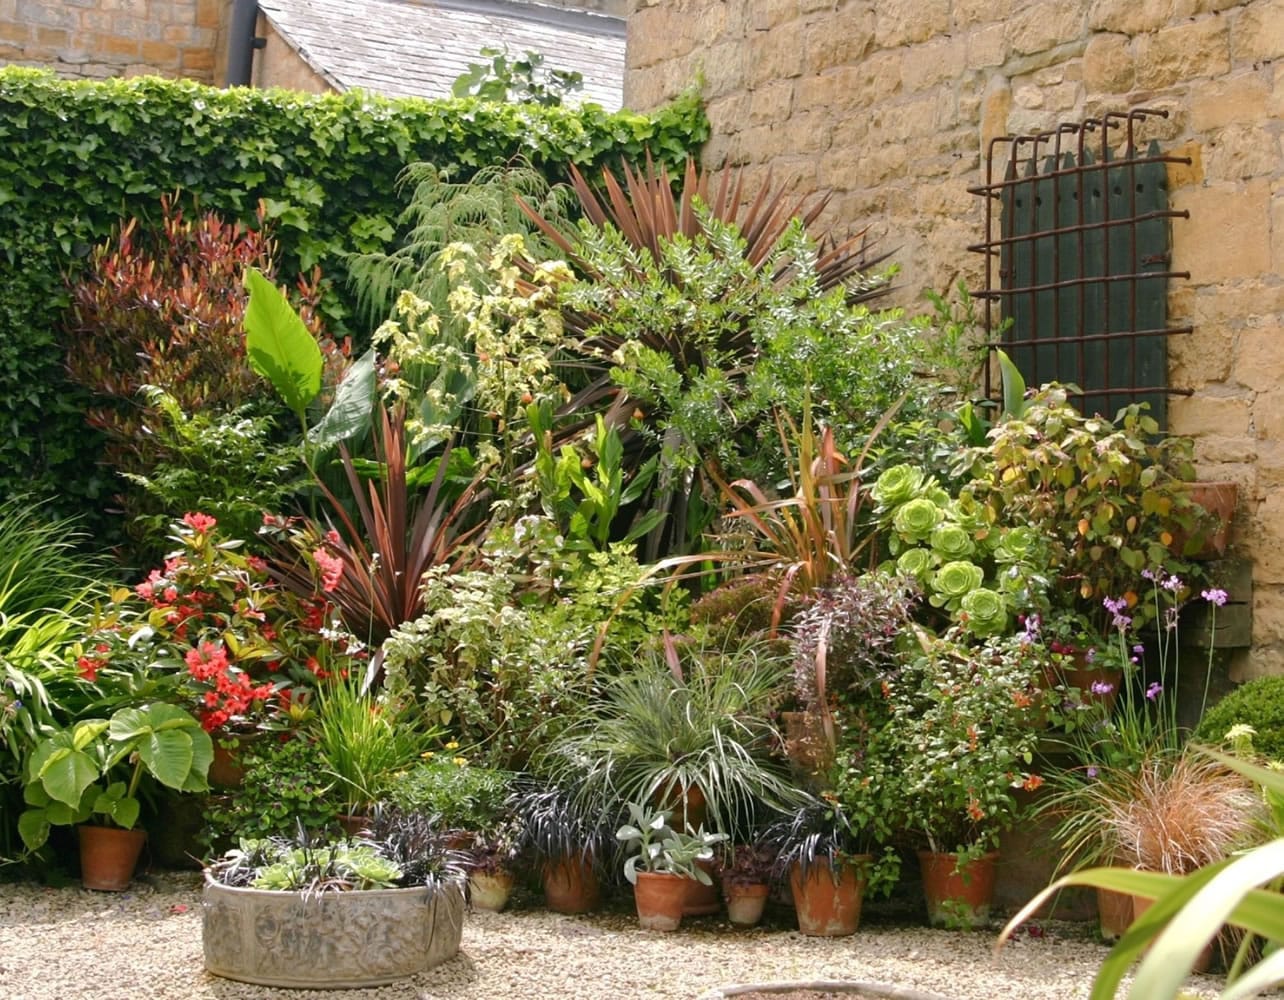 A cluster of interesting pots and planters makes a fine showcase for your latest seasonal plant purchases.